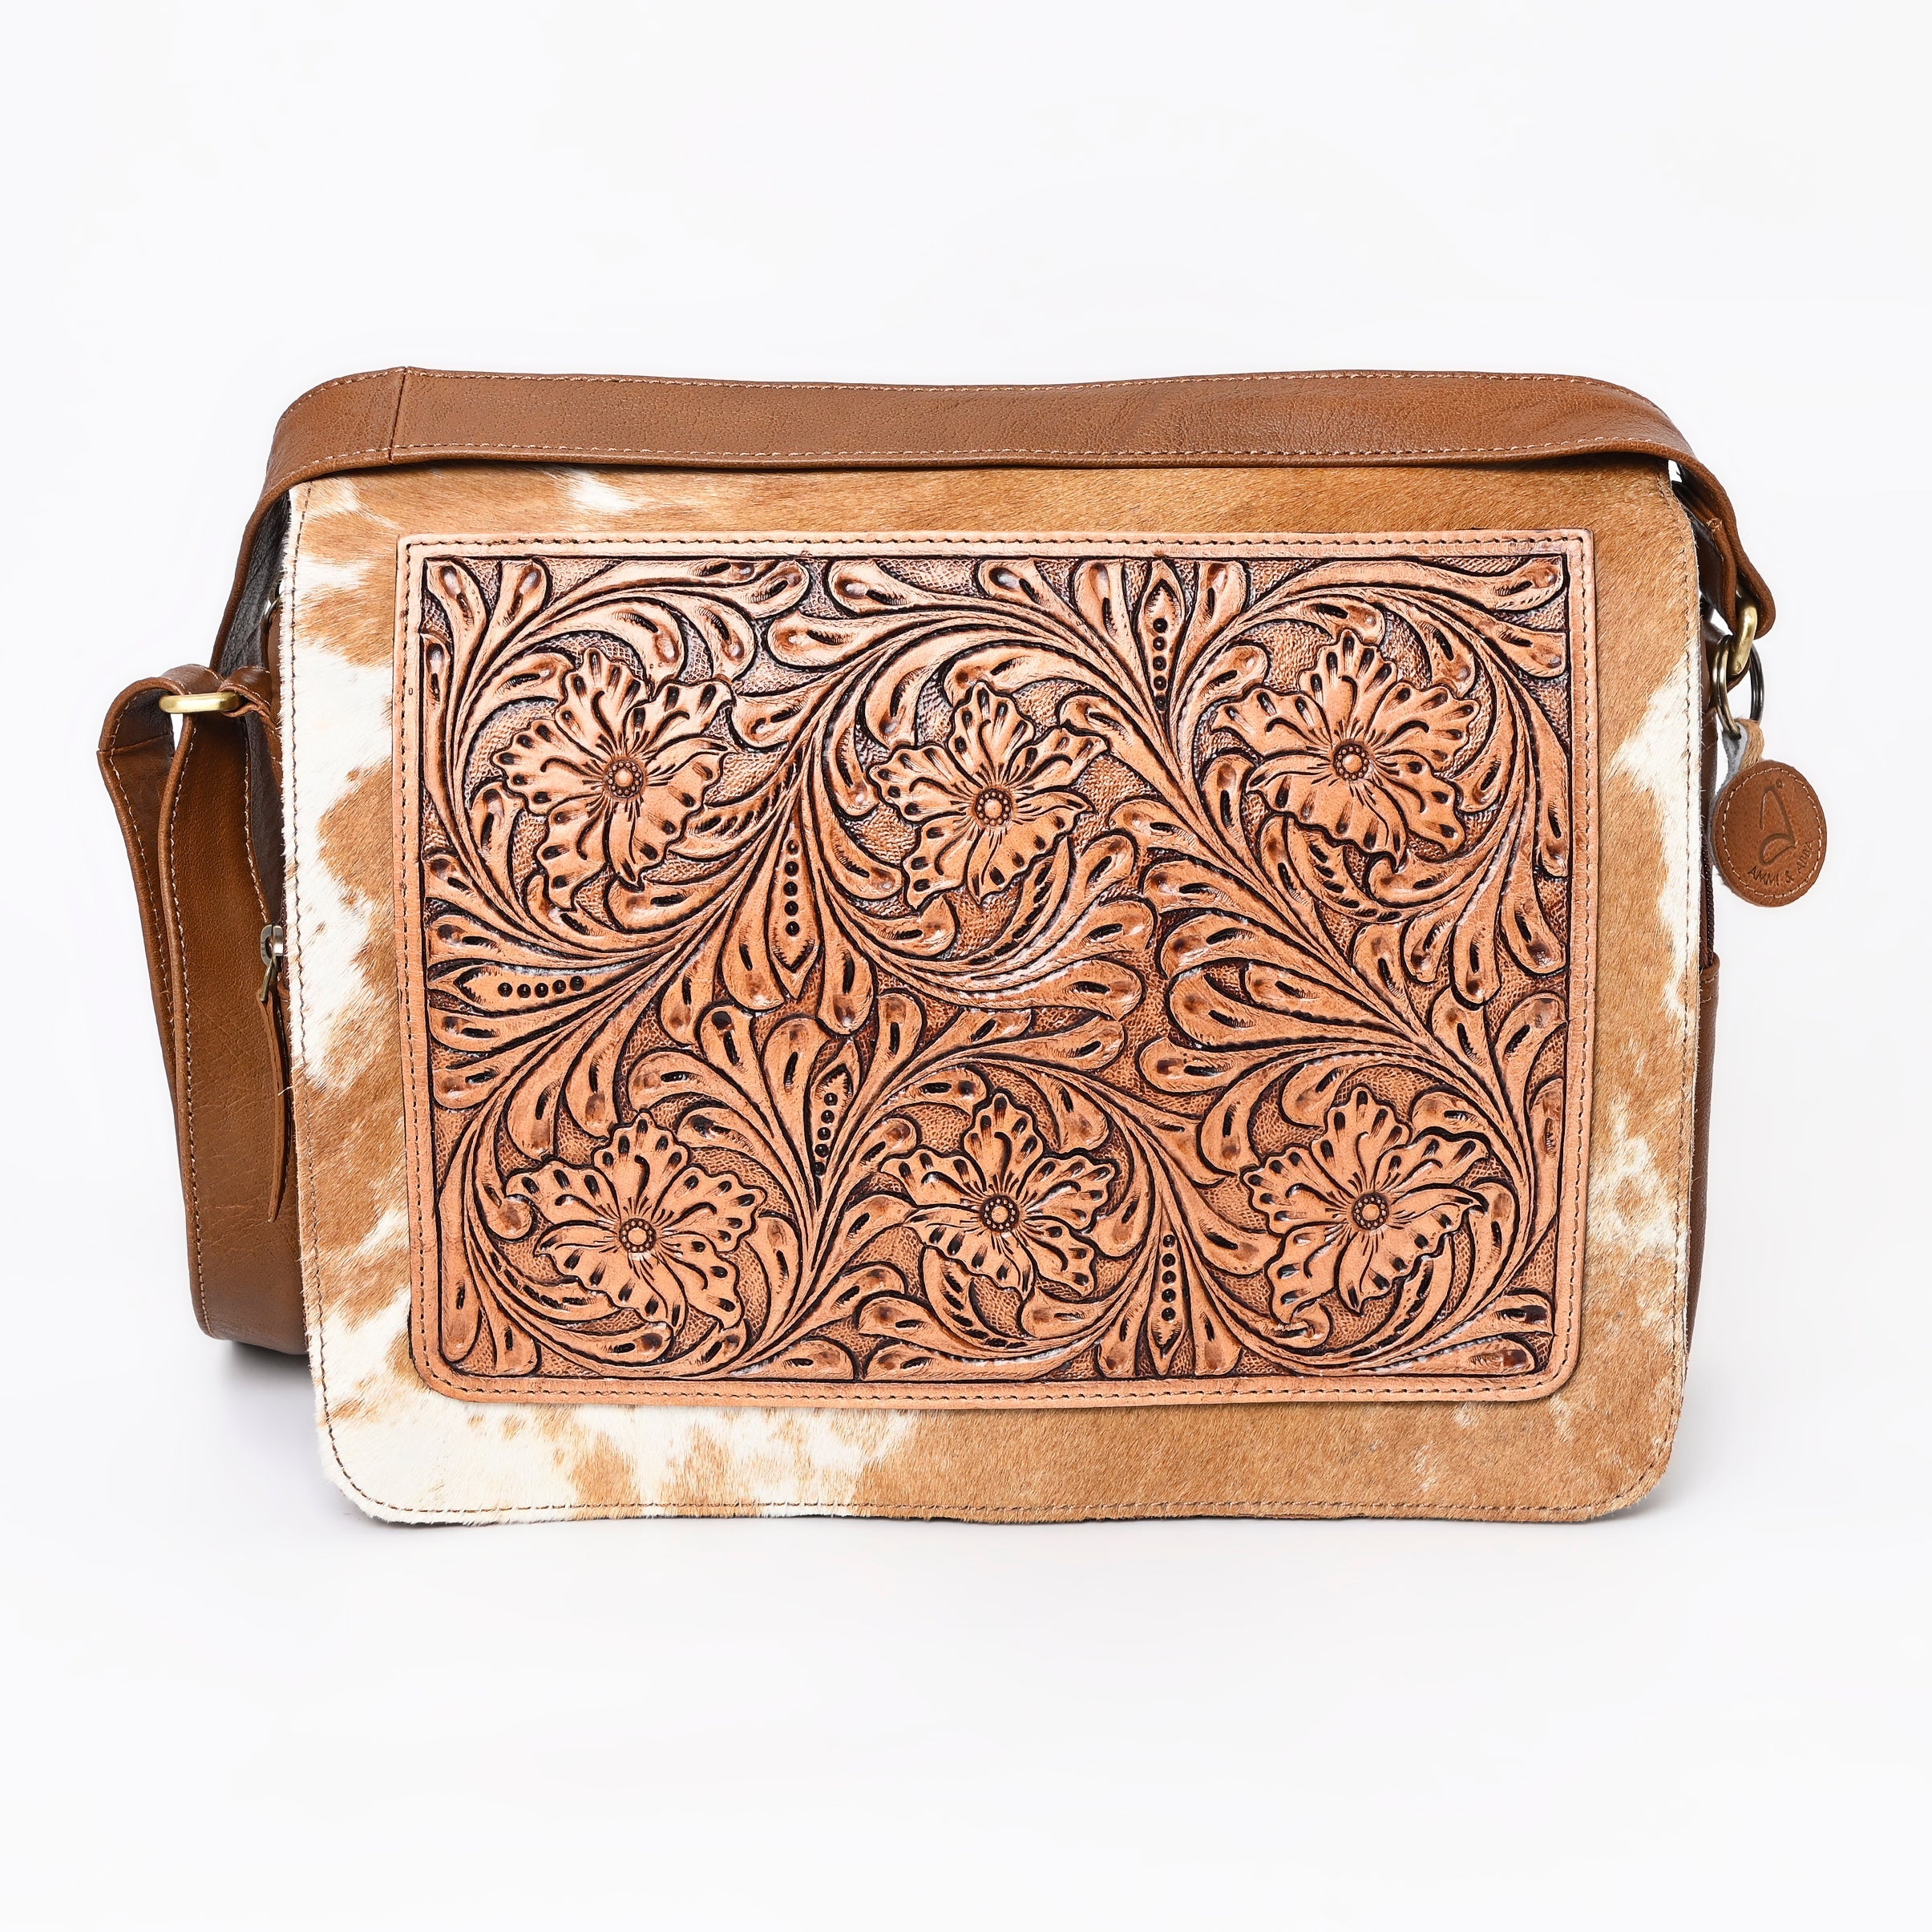 Montana West Hair On Leather Laptop Sleeve /Messenger Bag/Briefcase Computer Bag-13 - Cowgirl Wear